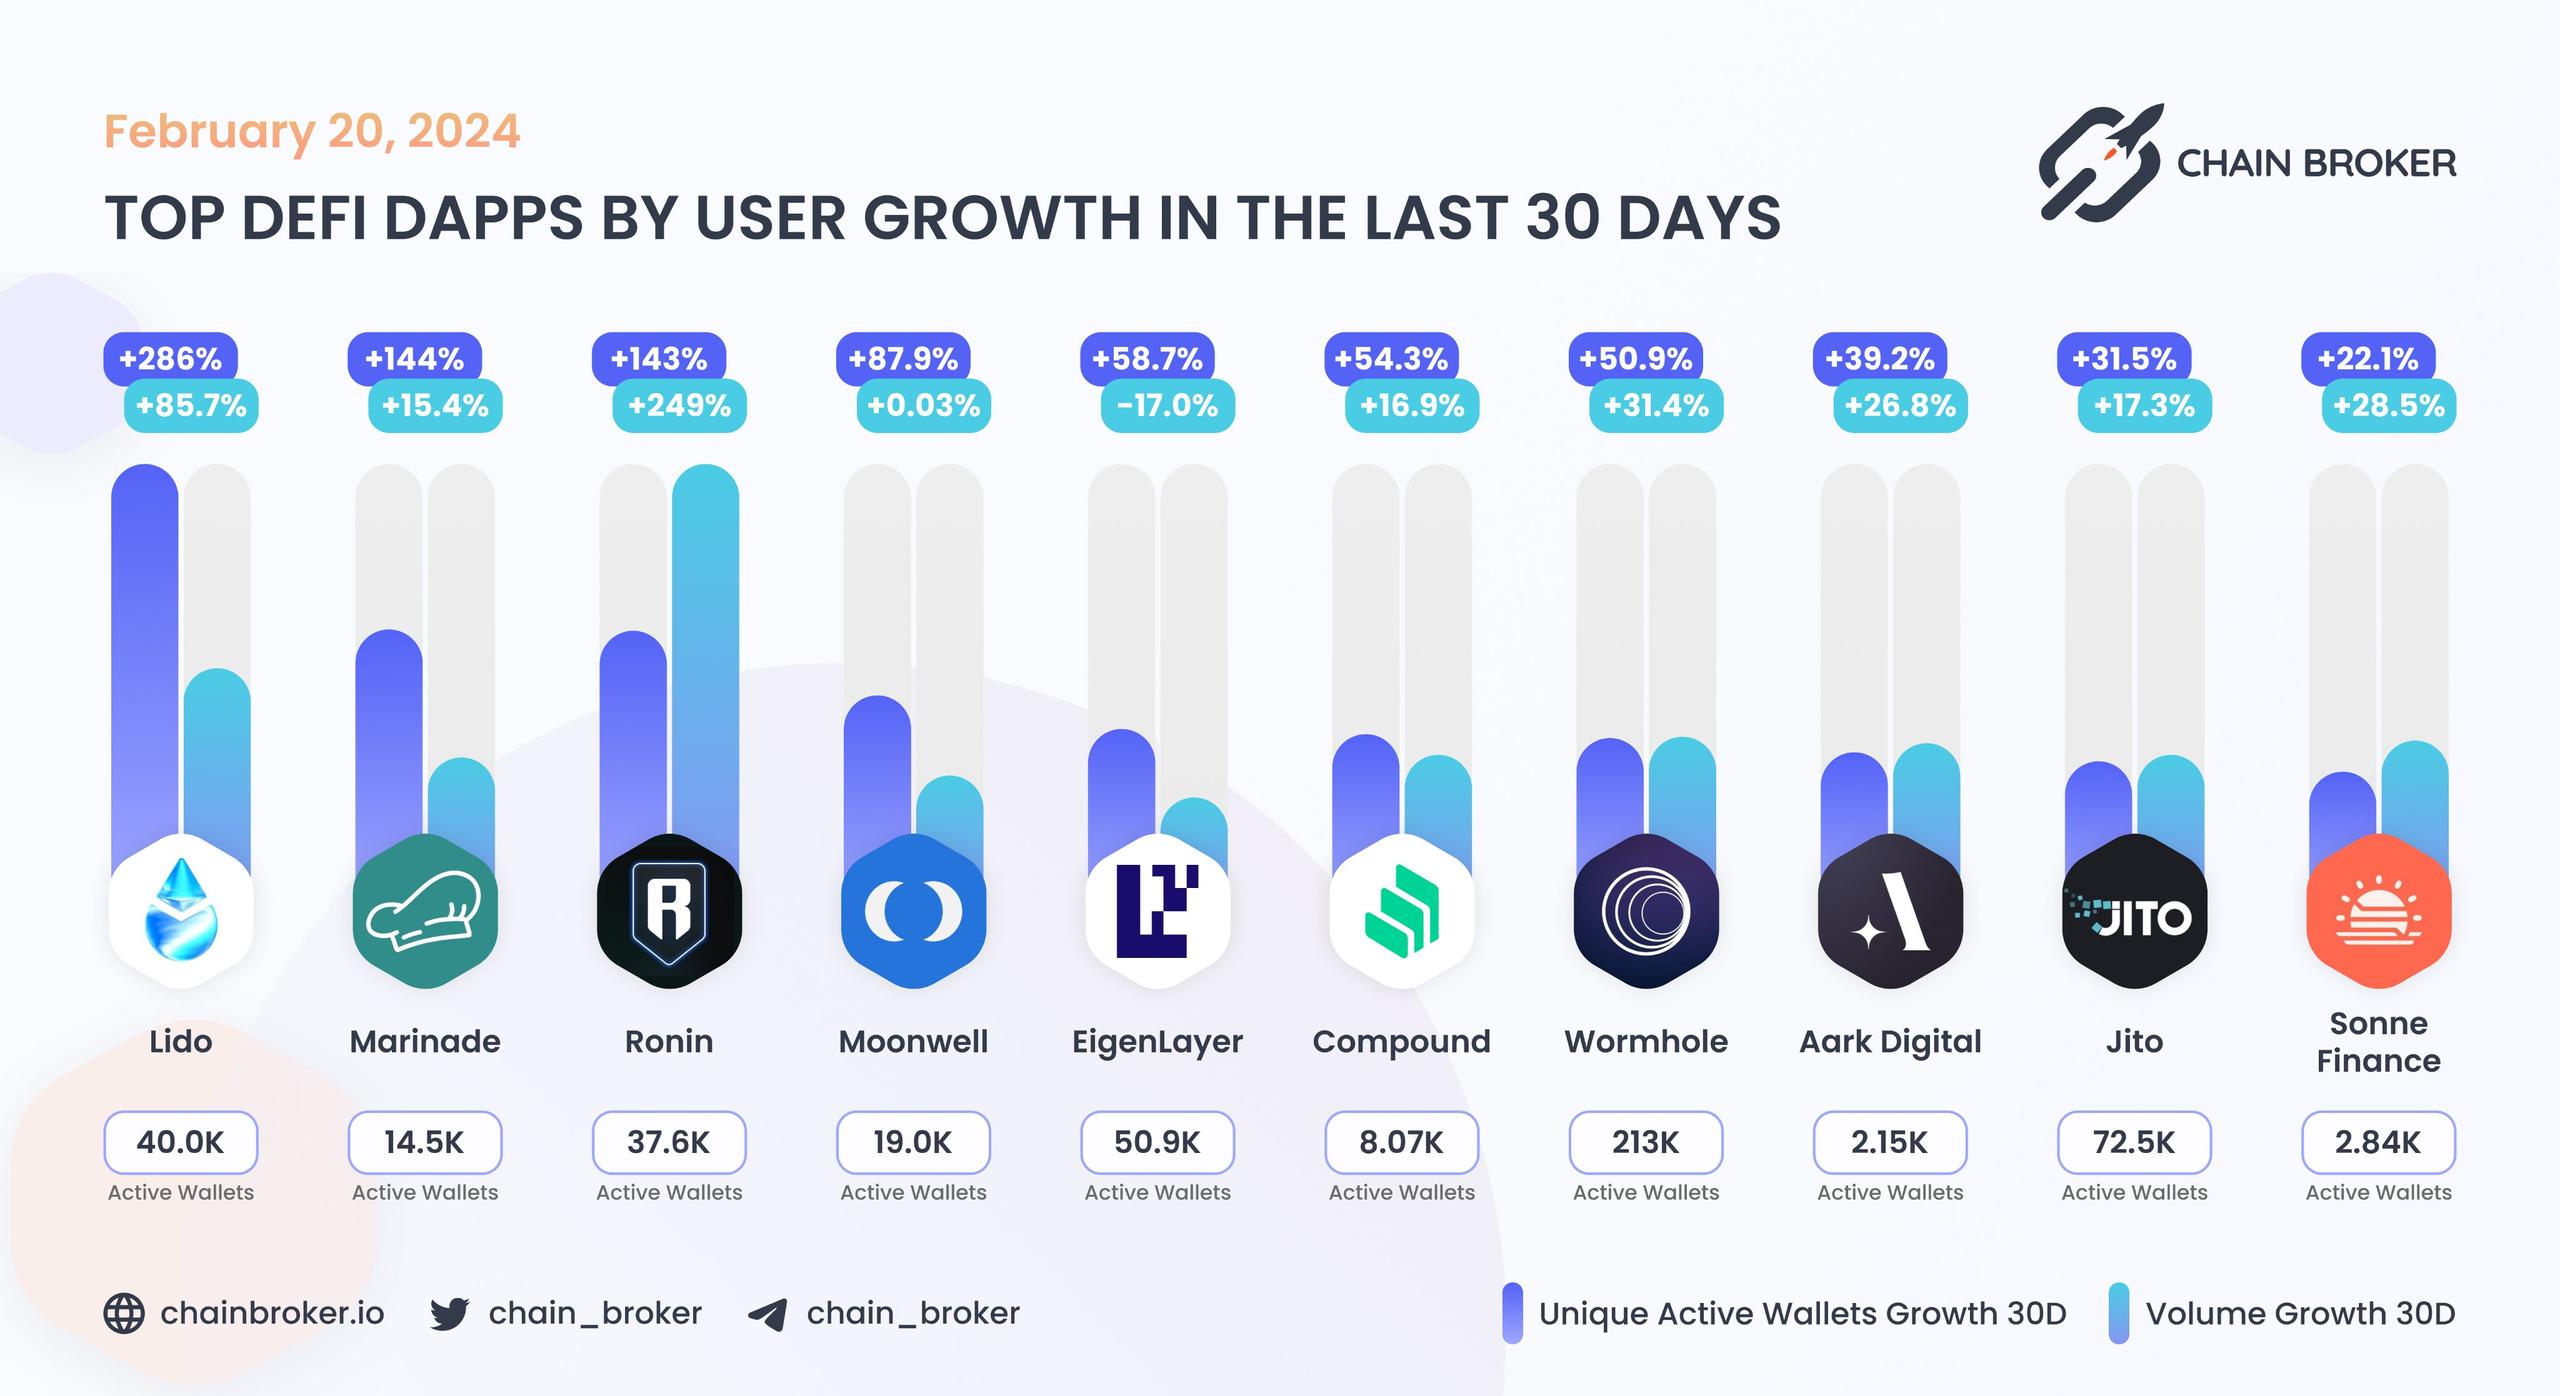 Top DeFi dApps by users